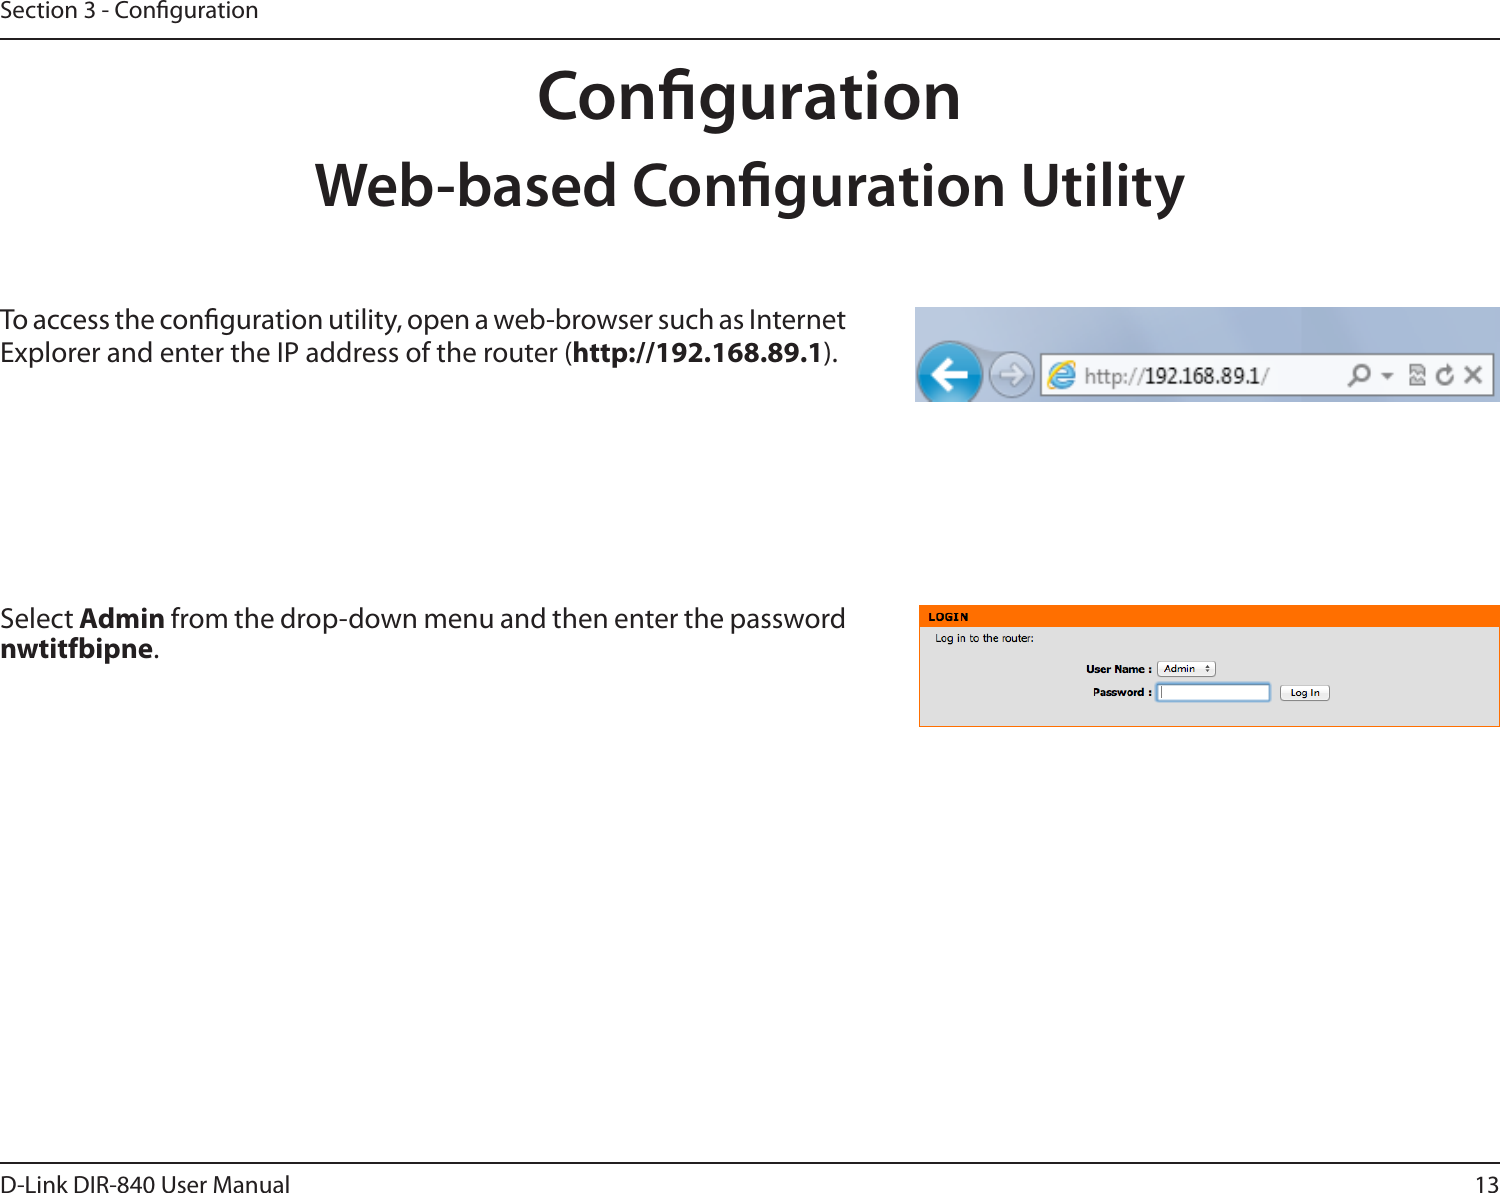 13D-Link DIR-840 User ManualSection 3 - CongurationWeb-based Conguration UtilitySelect Admin from the drop-down menu and then enter the password nwtitfbipne.To access the conguration utility, open a web-browser such as Internet Explorer and enter the IP address of the router (http://192.168.89.1).Conguration